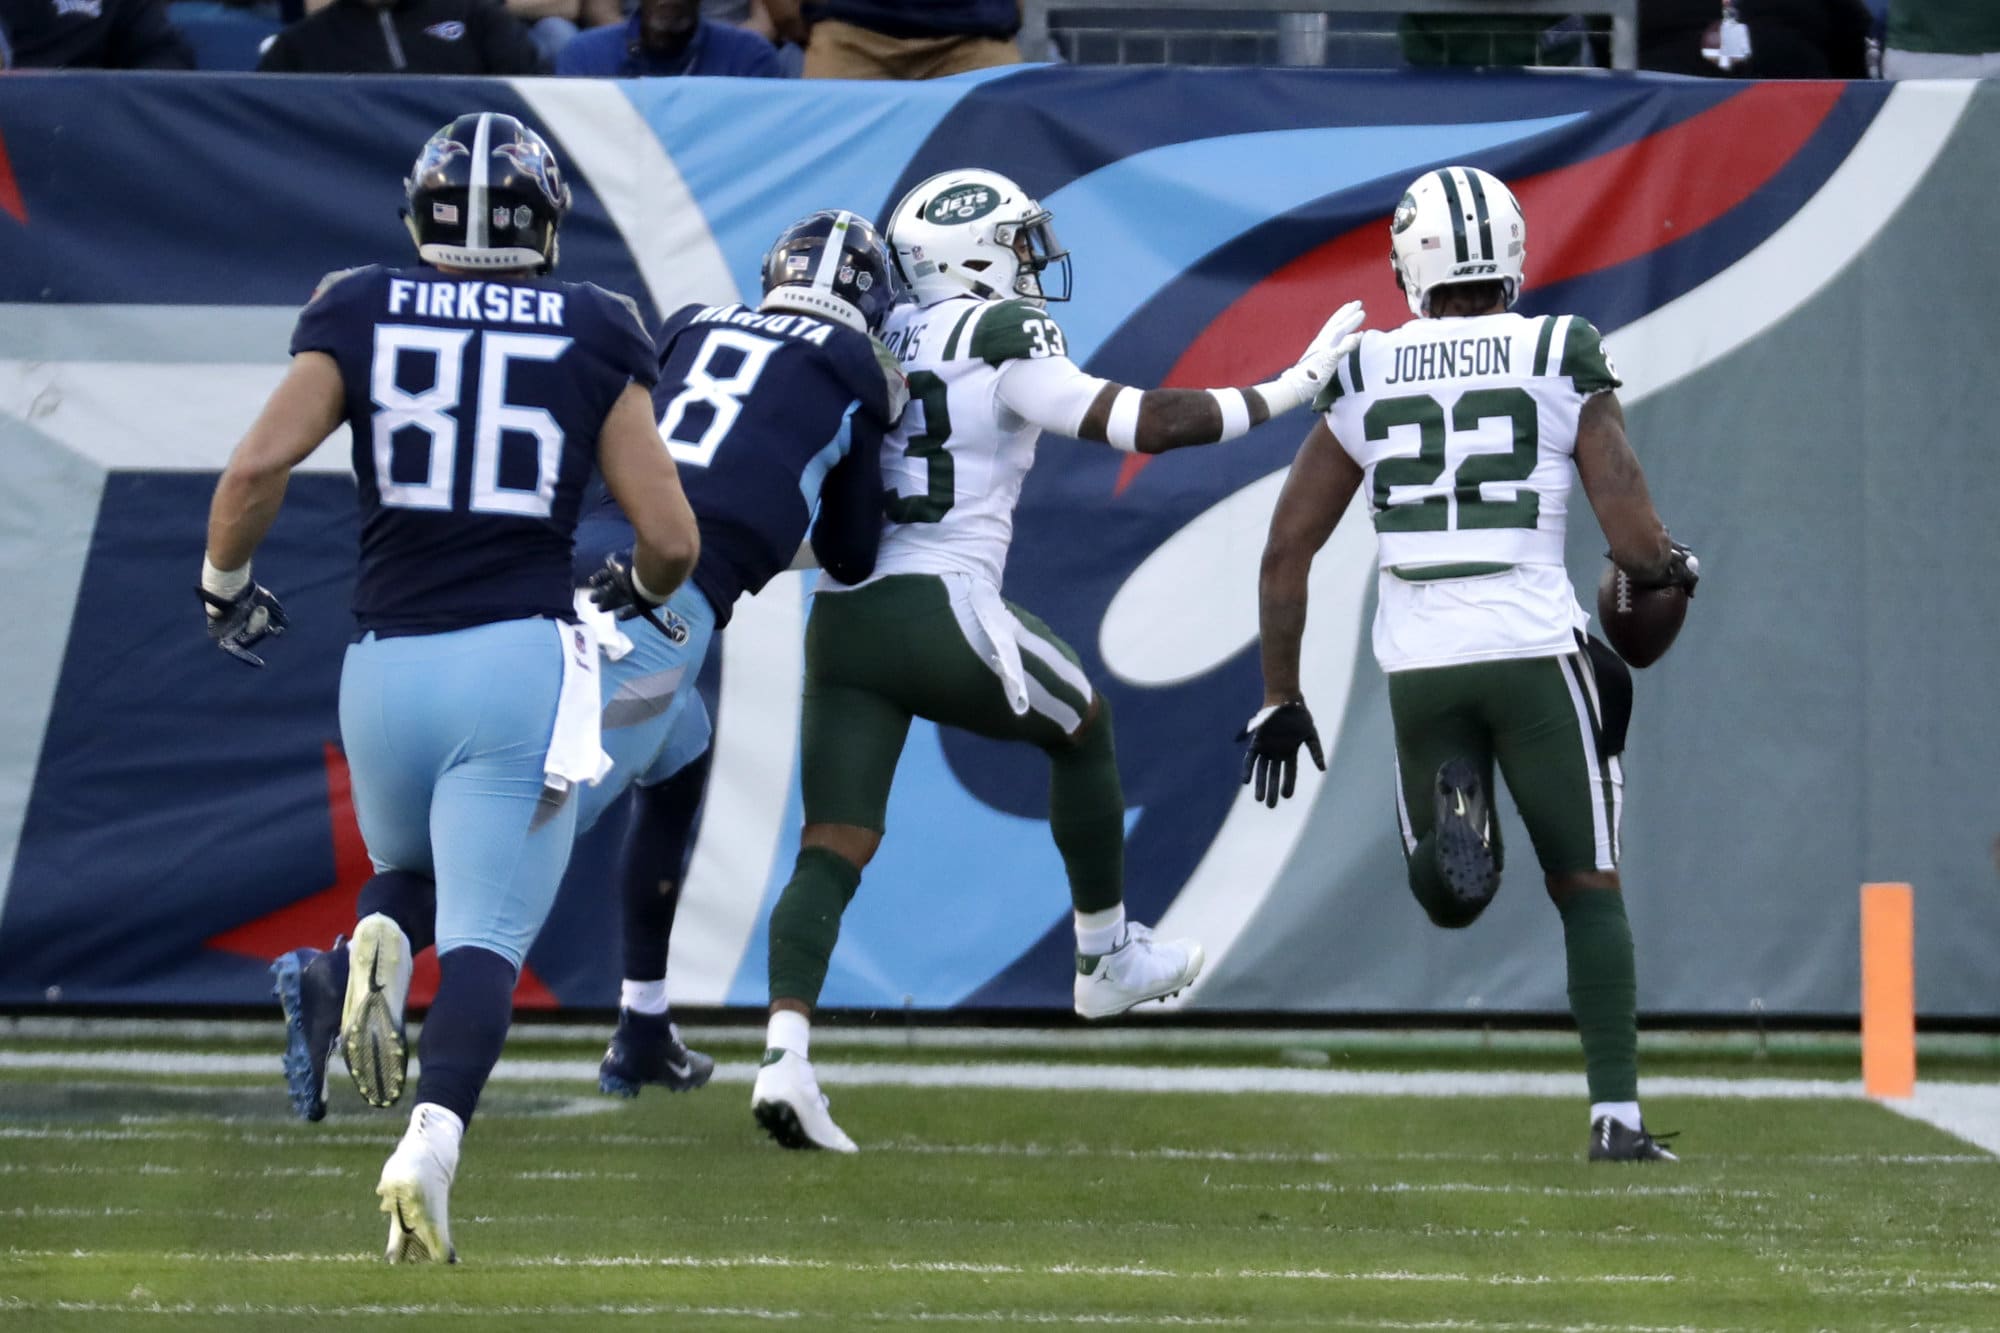 New York Jets cornerback Trumaine Johnson (22) scores a touchdown after intercepting a pass by Tennessee Titans quarterback Marcus Mariota (8) in the first half of an NFL football game Sunday, Dec. 2, 2018, in Nashville, Tenn. (AP Photo/James Kenney)